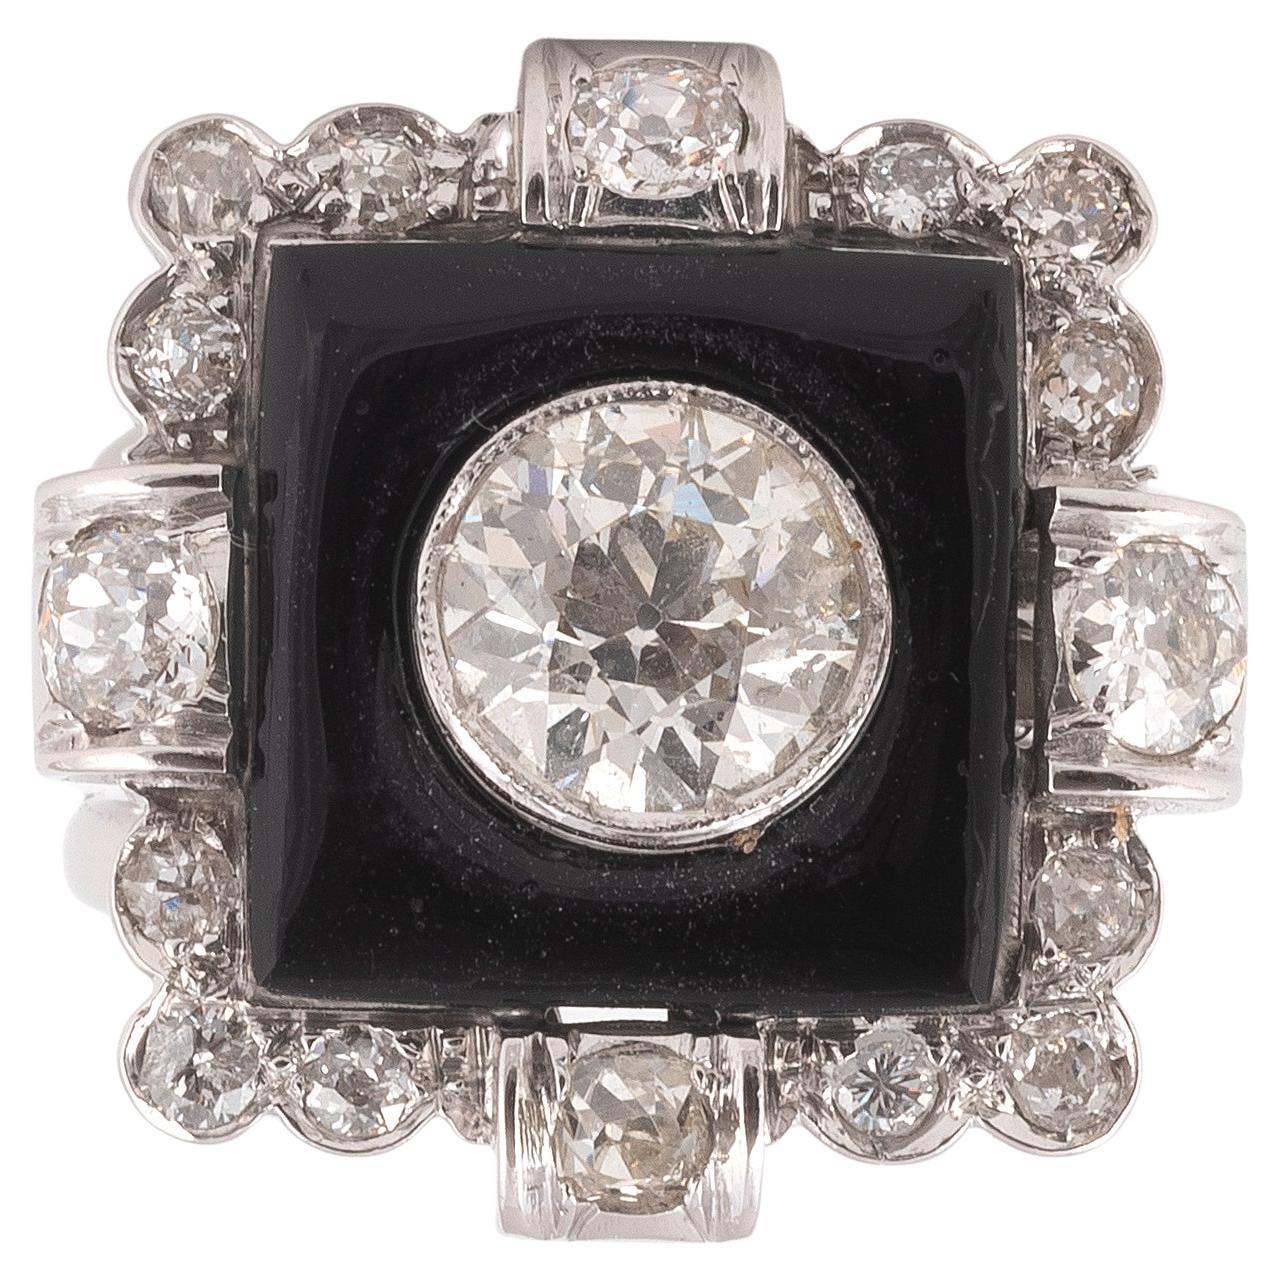 onyx ring with diamond in center